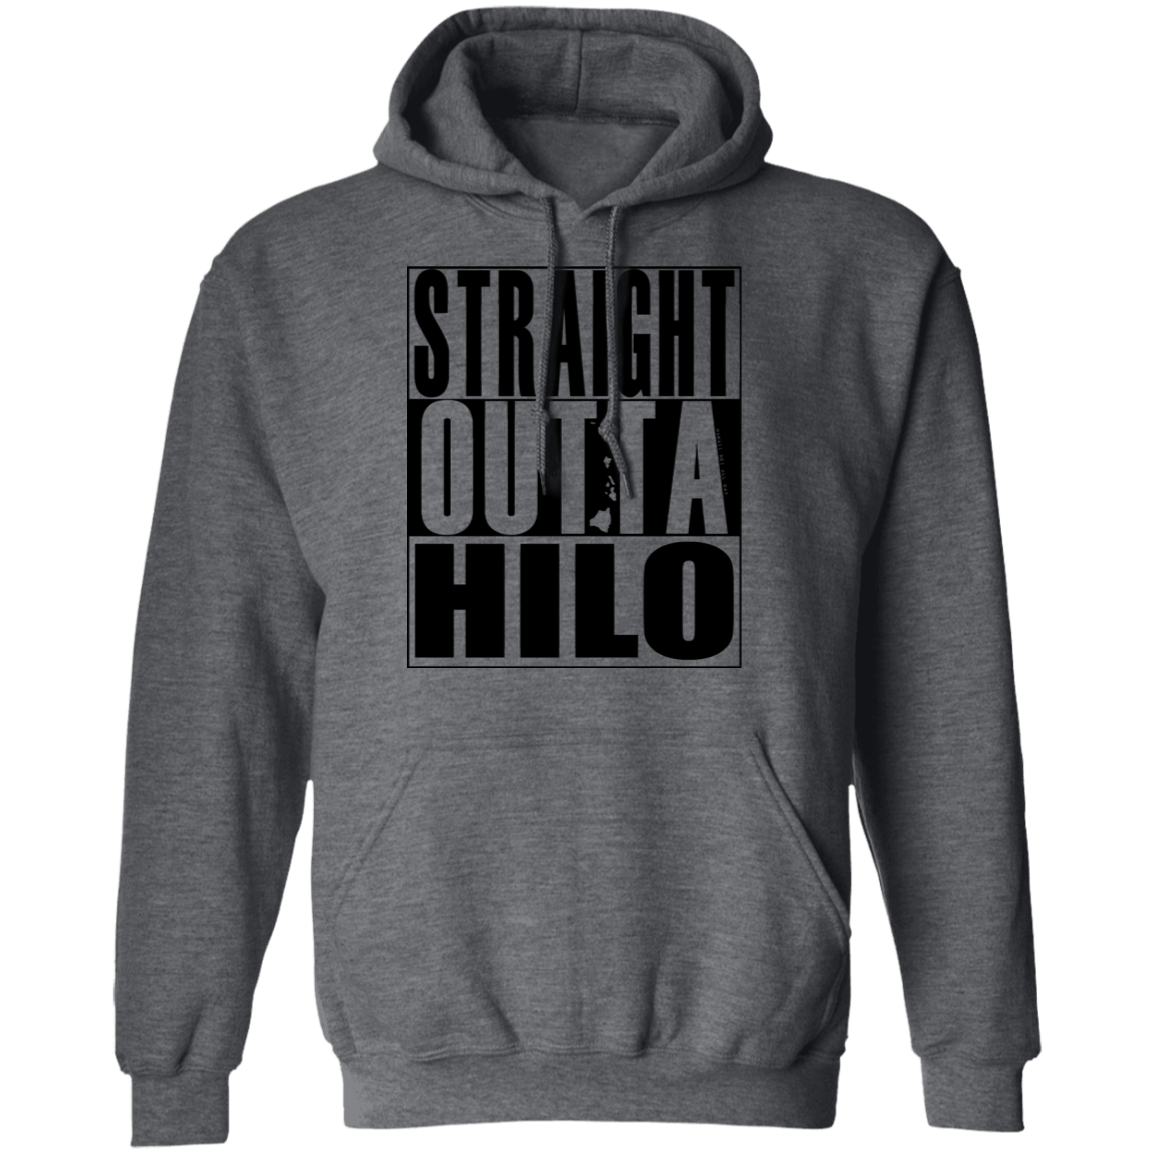 Straight Outta Hilo(black ink) Pullover Hoodie